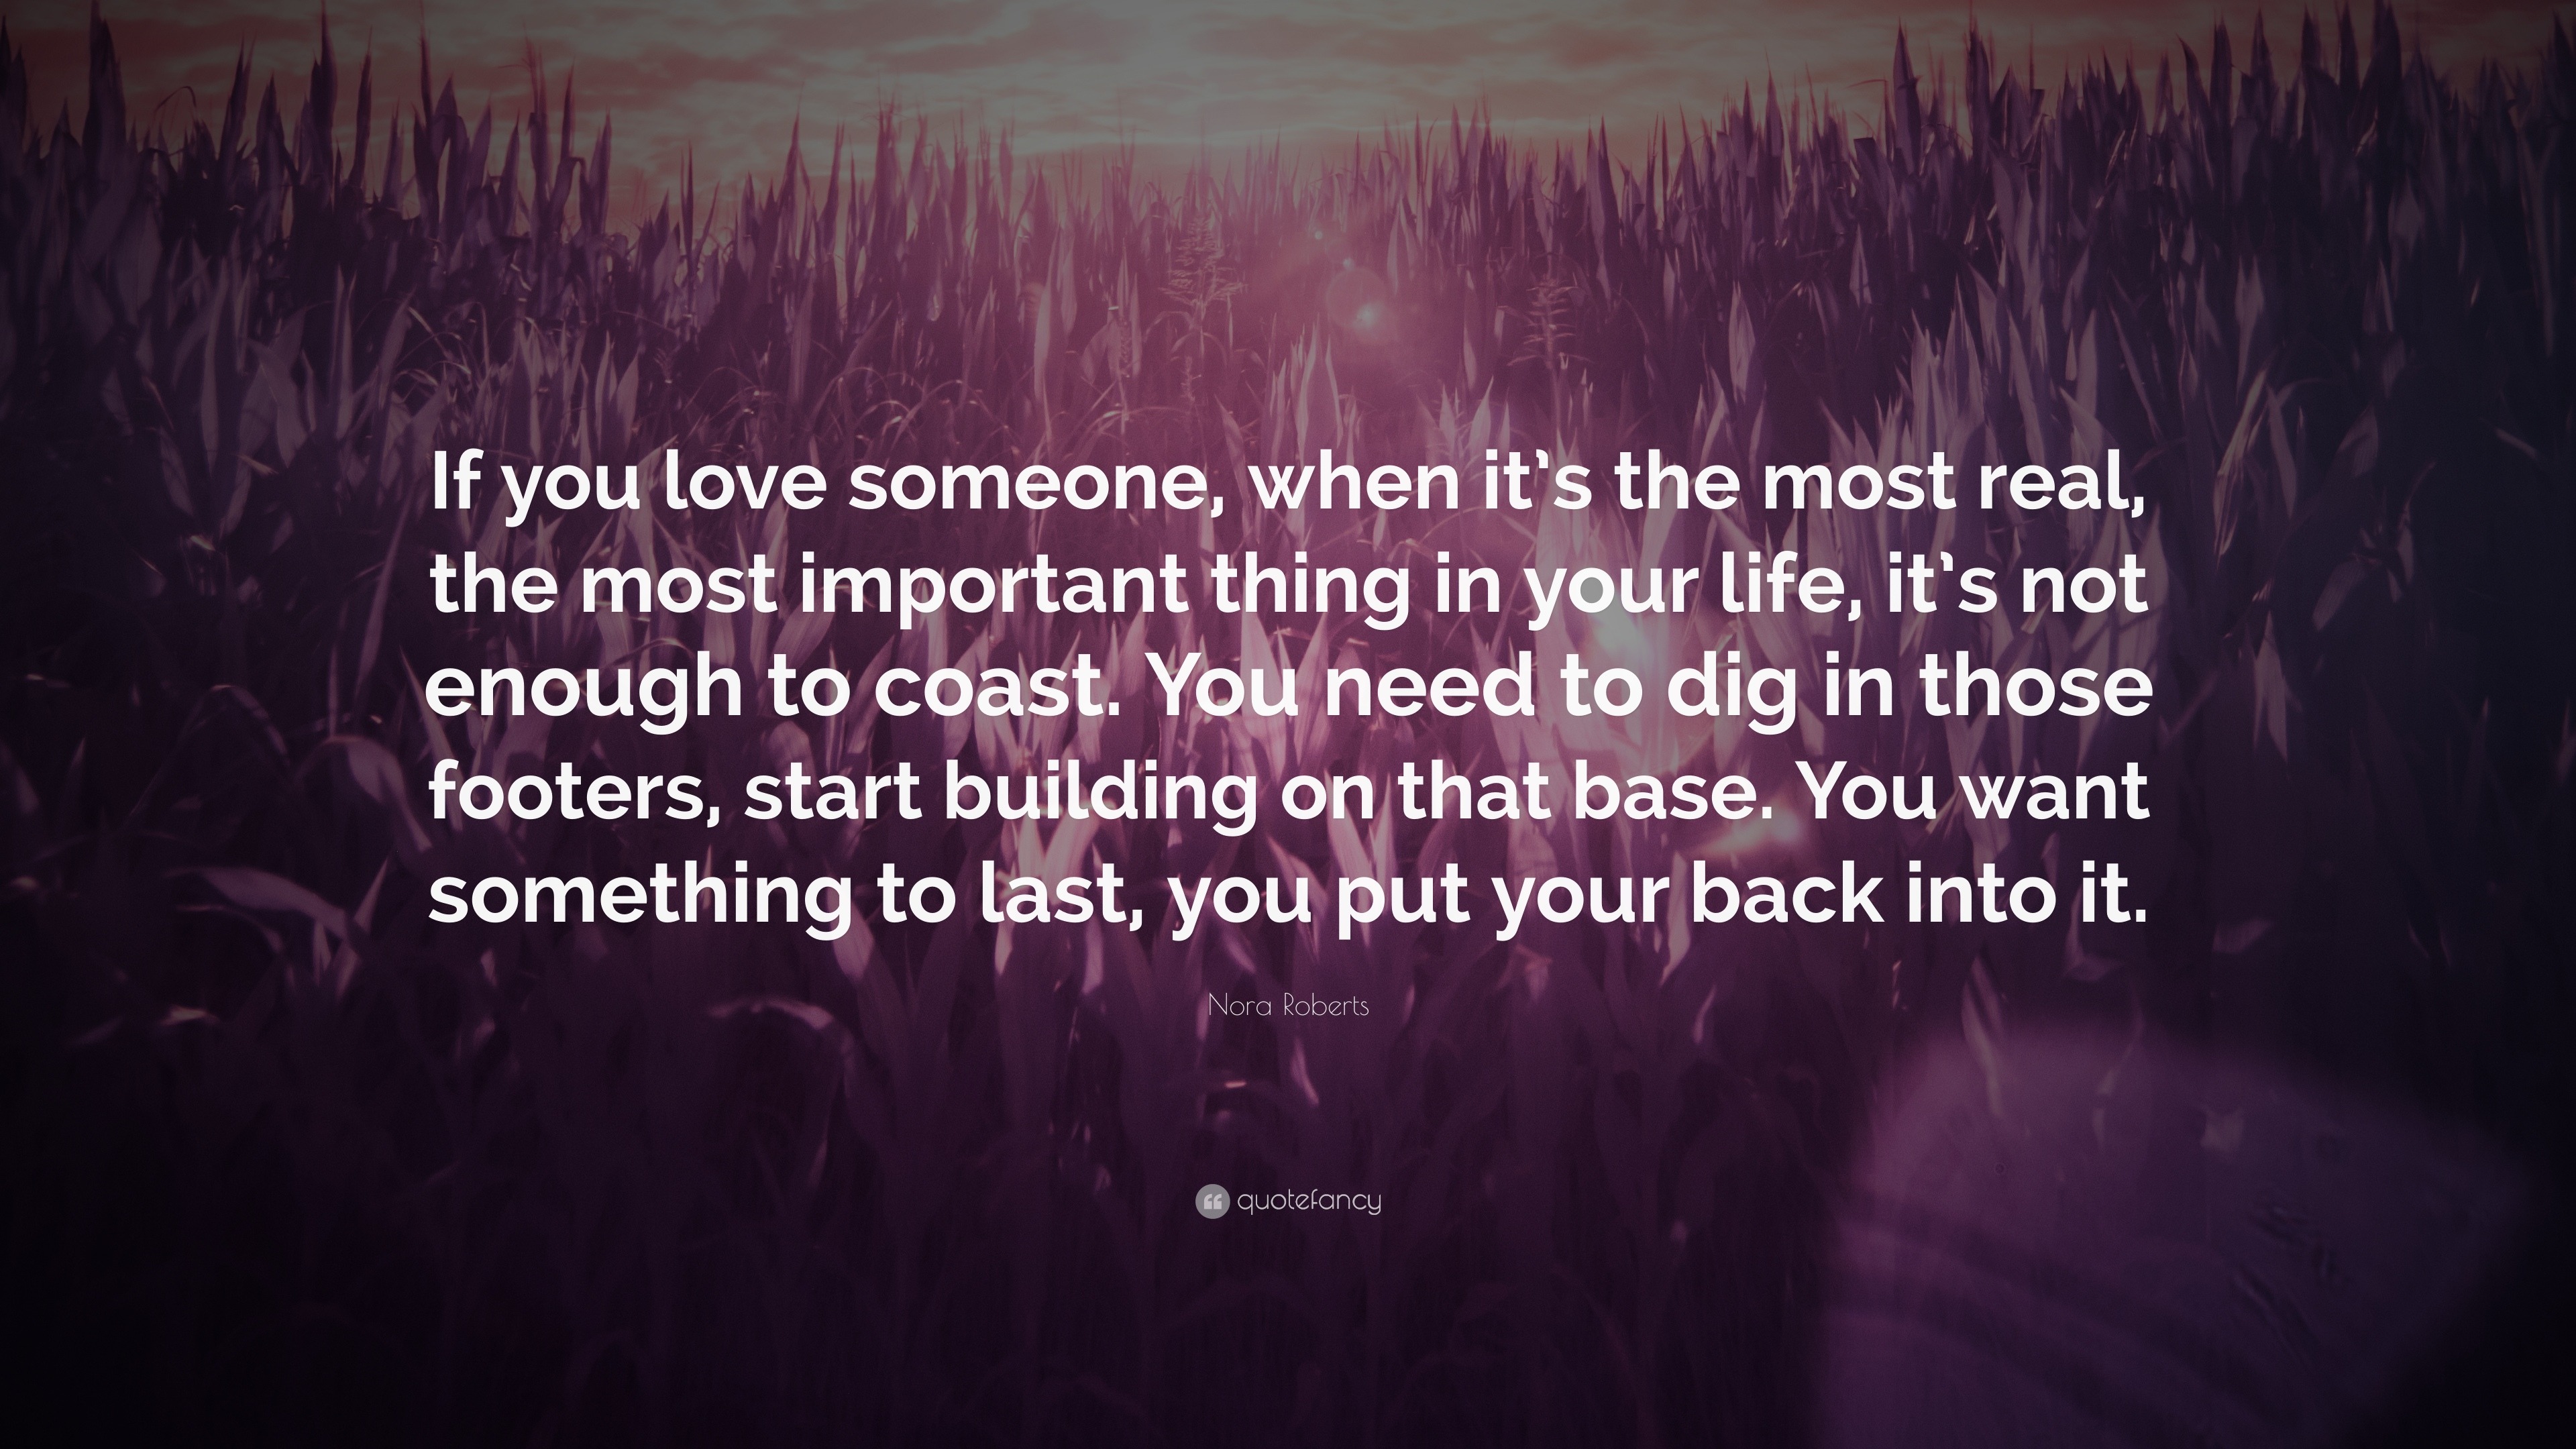 Nora Roberts Quote “If you love someone when it s the most real